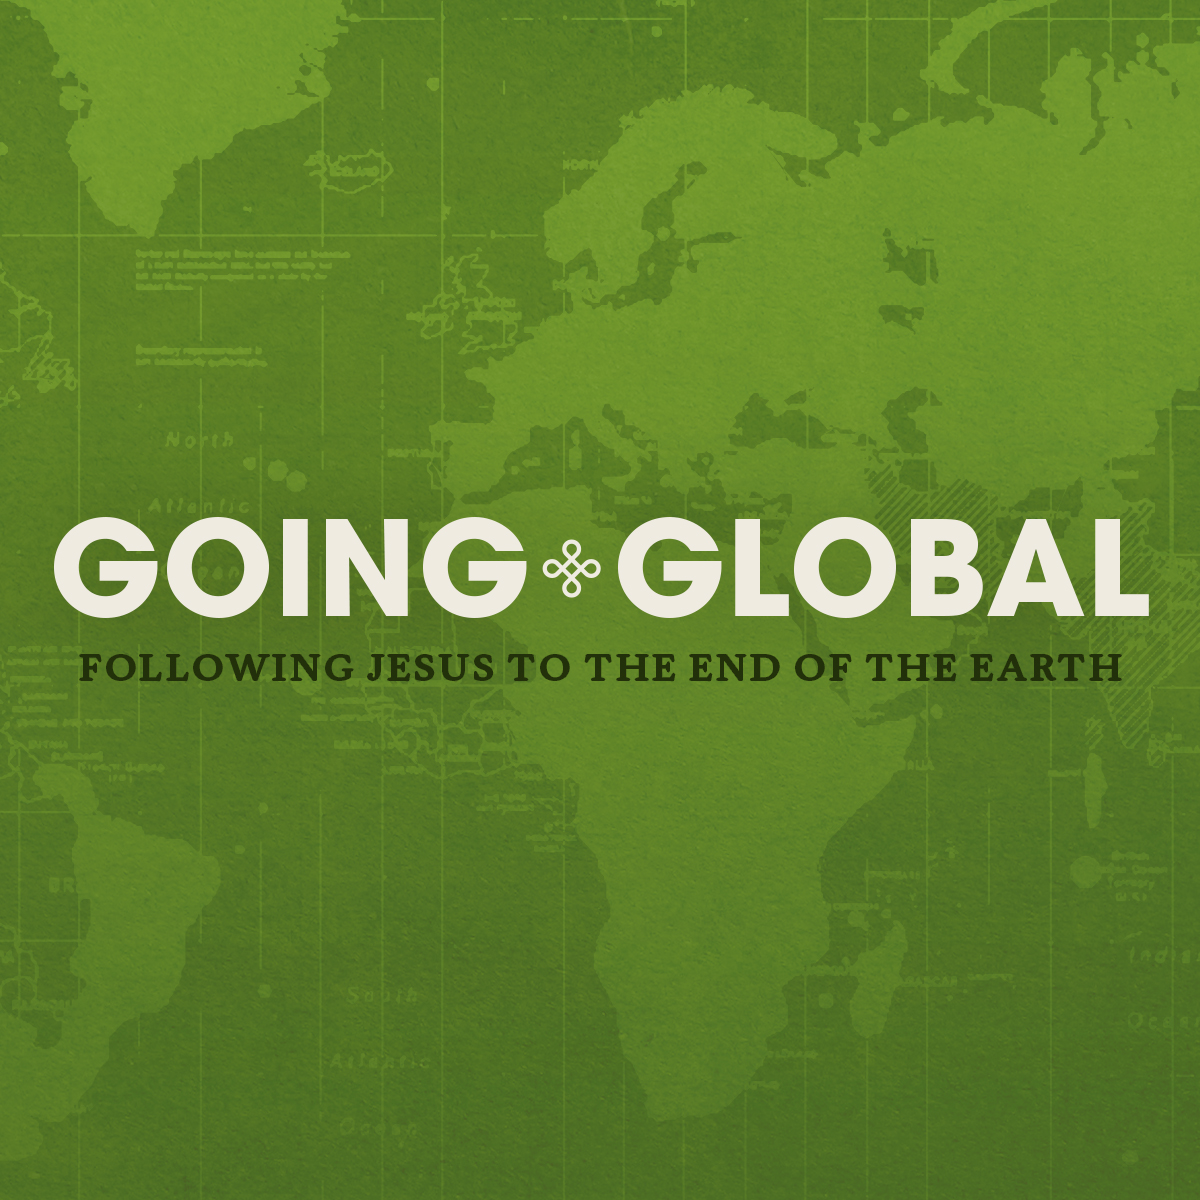 Going Global: Following Jesus to the End of the Earth